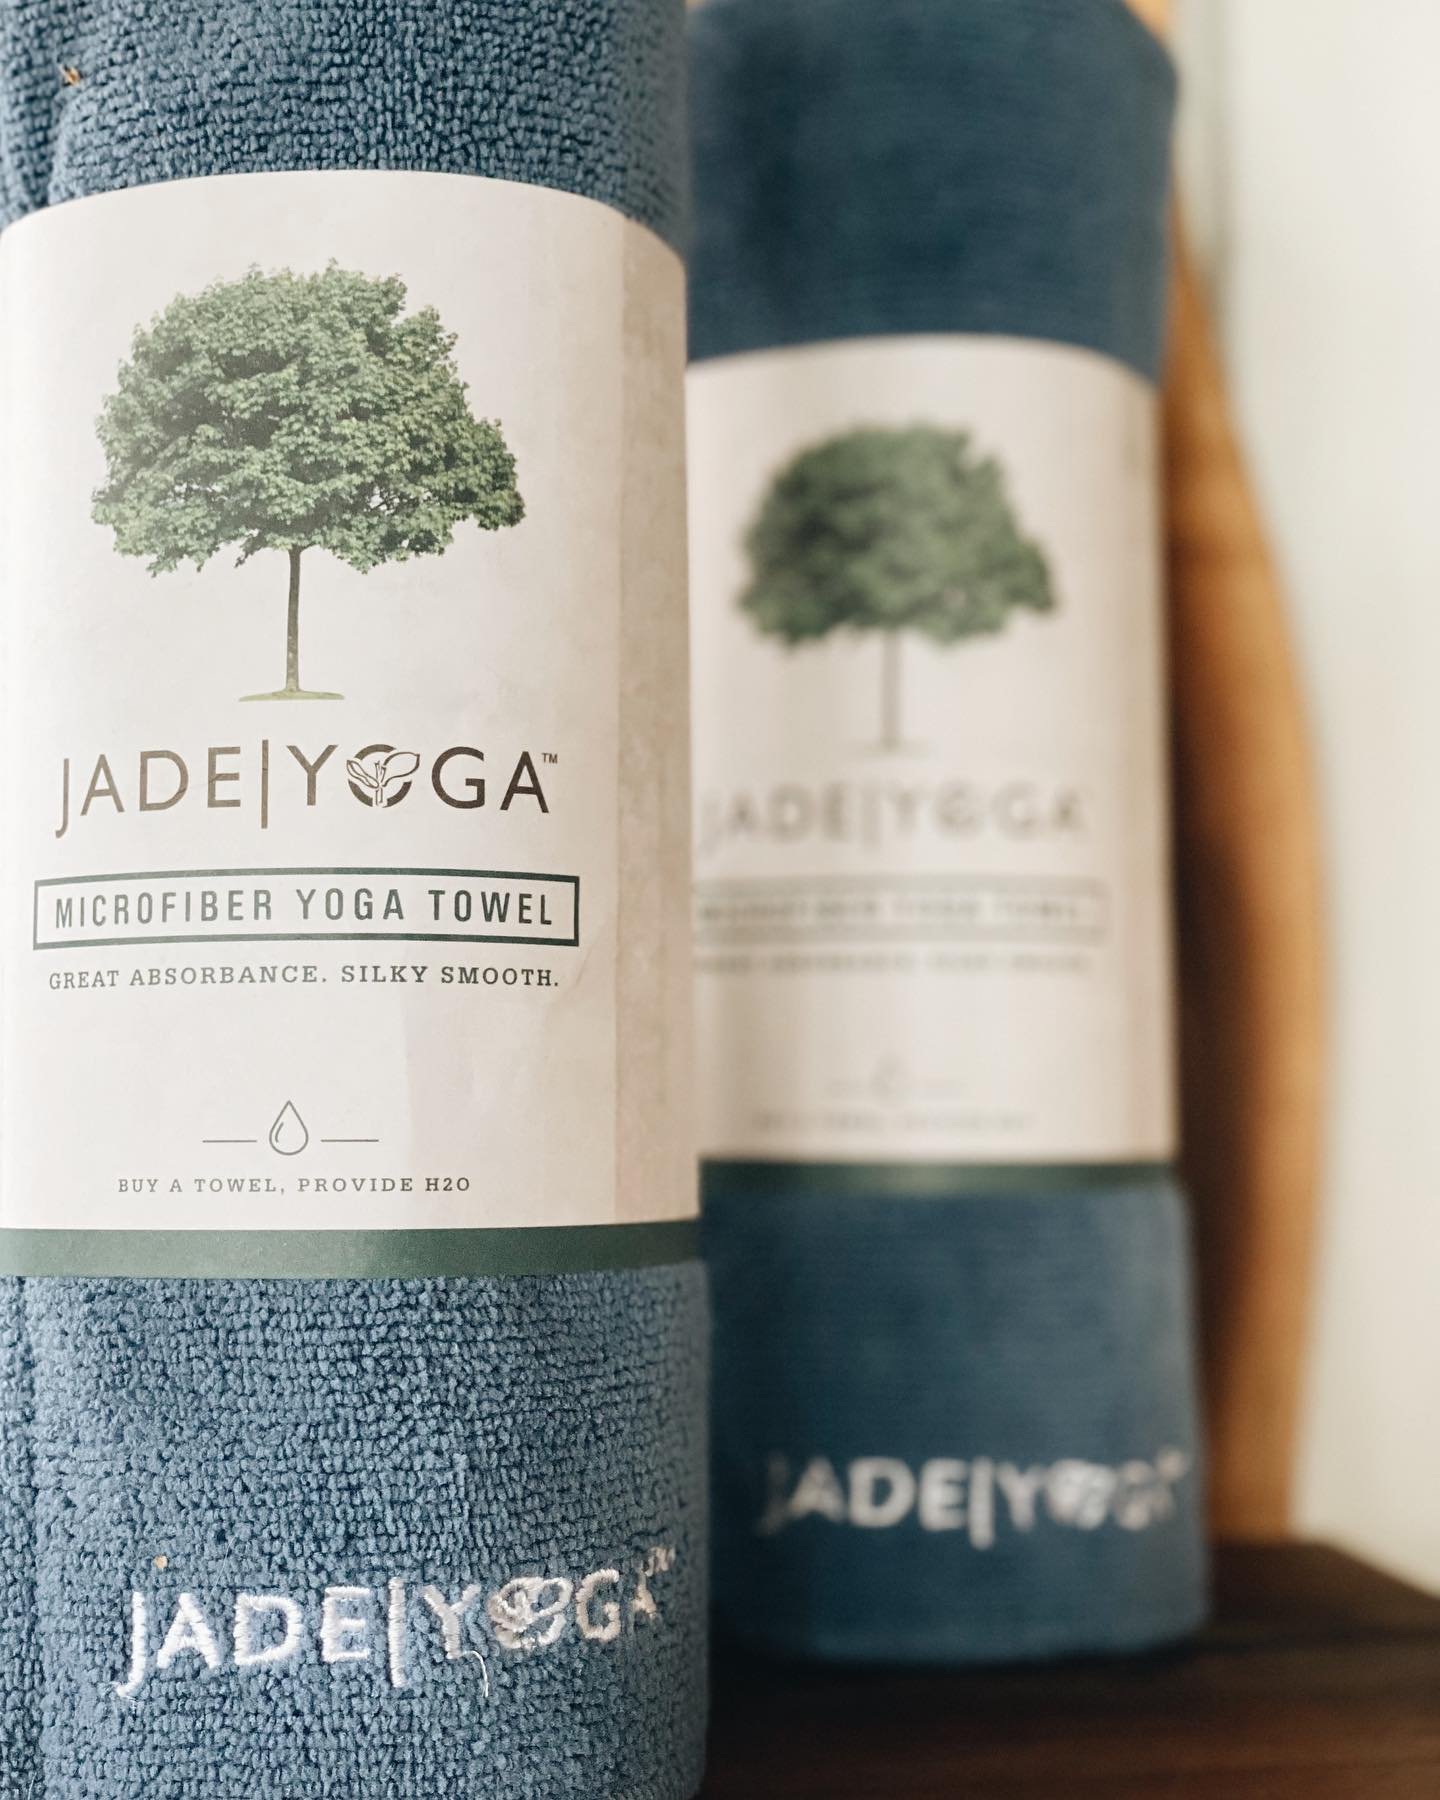 We love supporting Jade!

For every towel sold Jade Yoga provides one day of clean drinking water to someone in a developing nation. 

🙏 Let&rsquo;s shop with purpose.🙏
&bull;
&bull;
&bull;
&bull;
#jadeyoga #jade #jadeyogaproducts #jadetowel #yogat